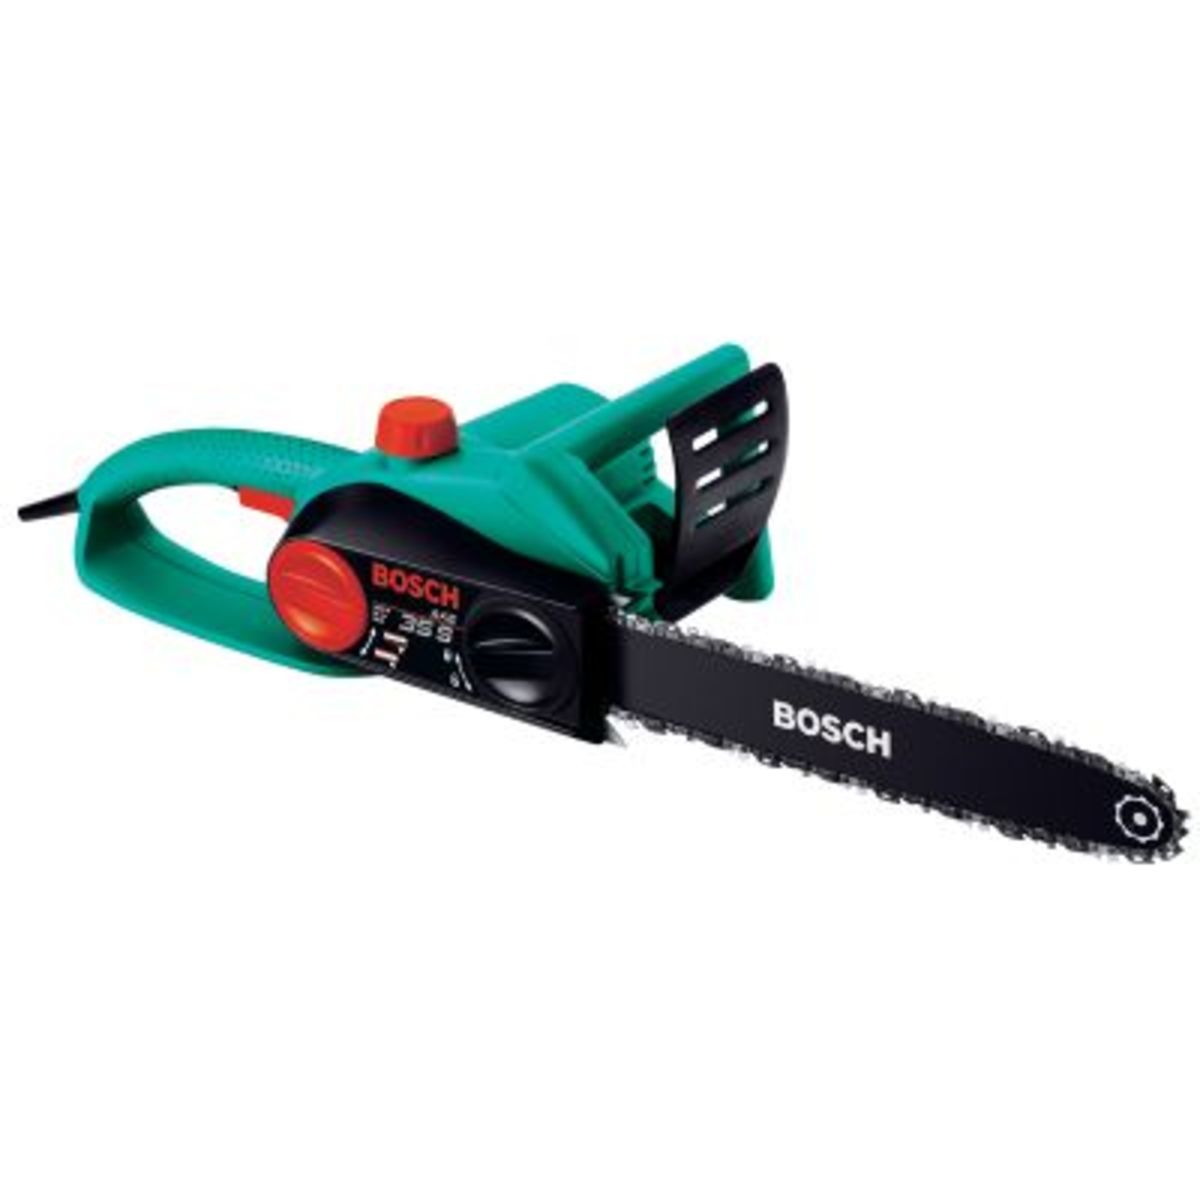 Bosch Electric Chainsaw Similar to Mine